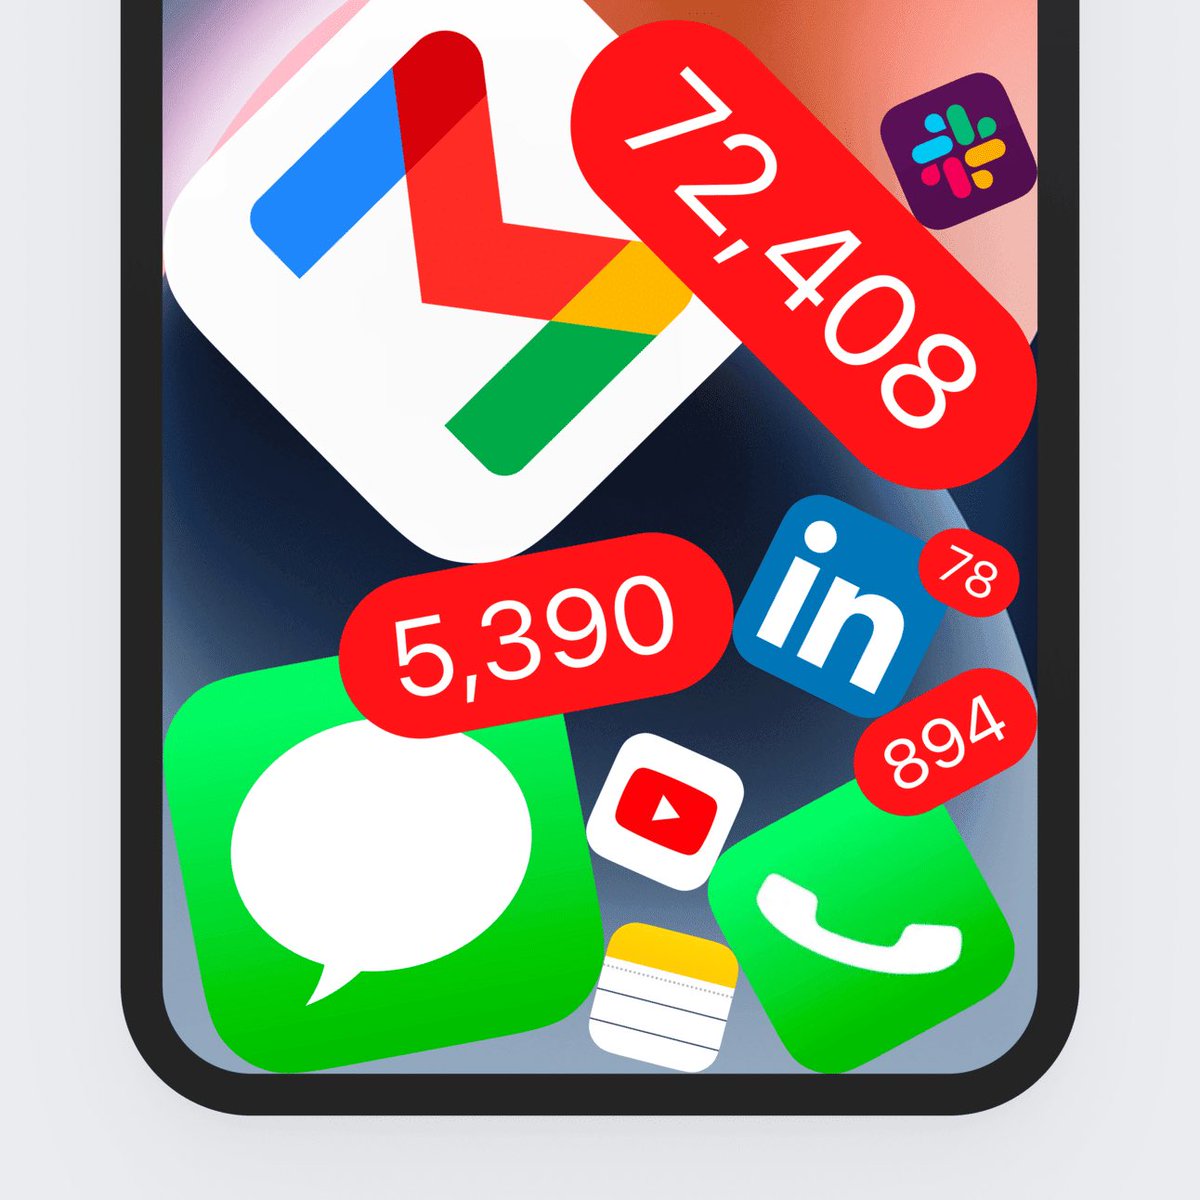 iOS apps get bigger the more unread notifications you have